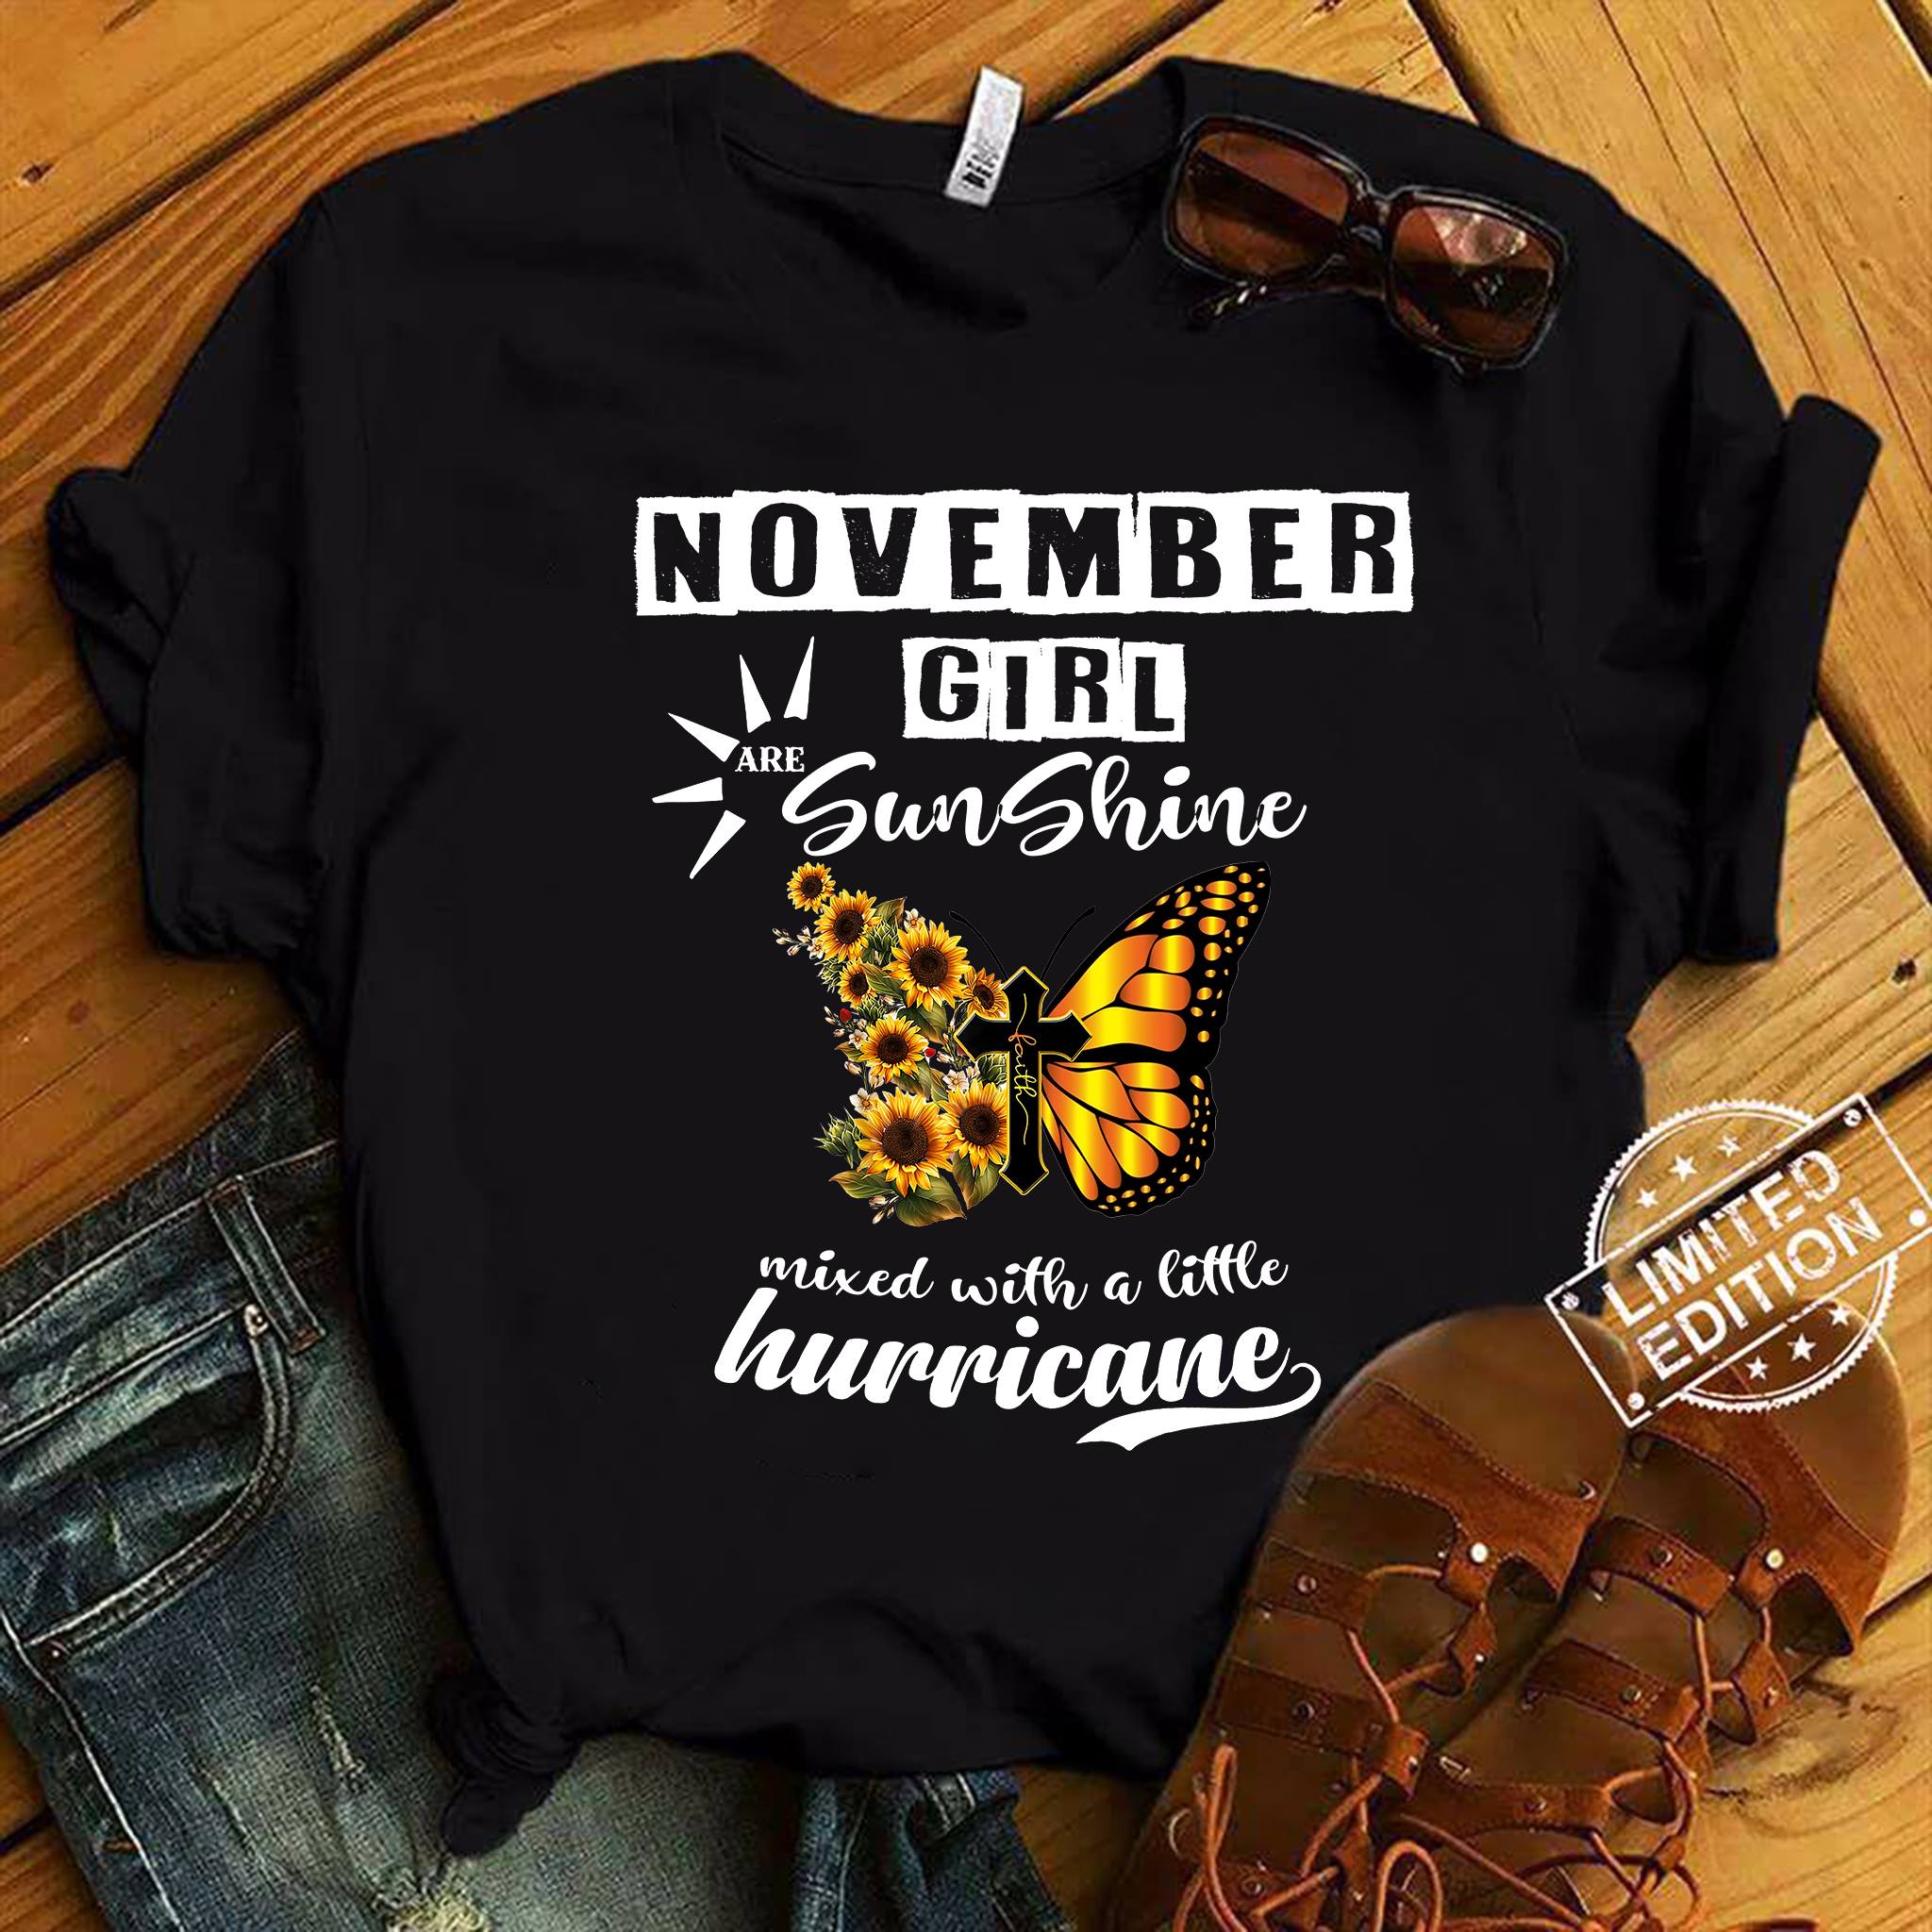 November girl are sunshine mixed with a little hurricane - Butterfly and God cross